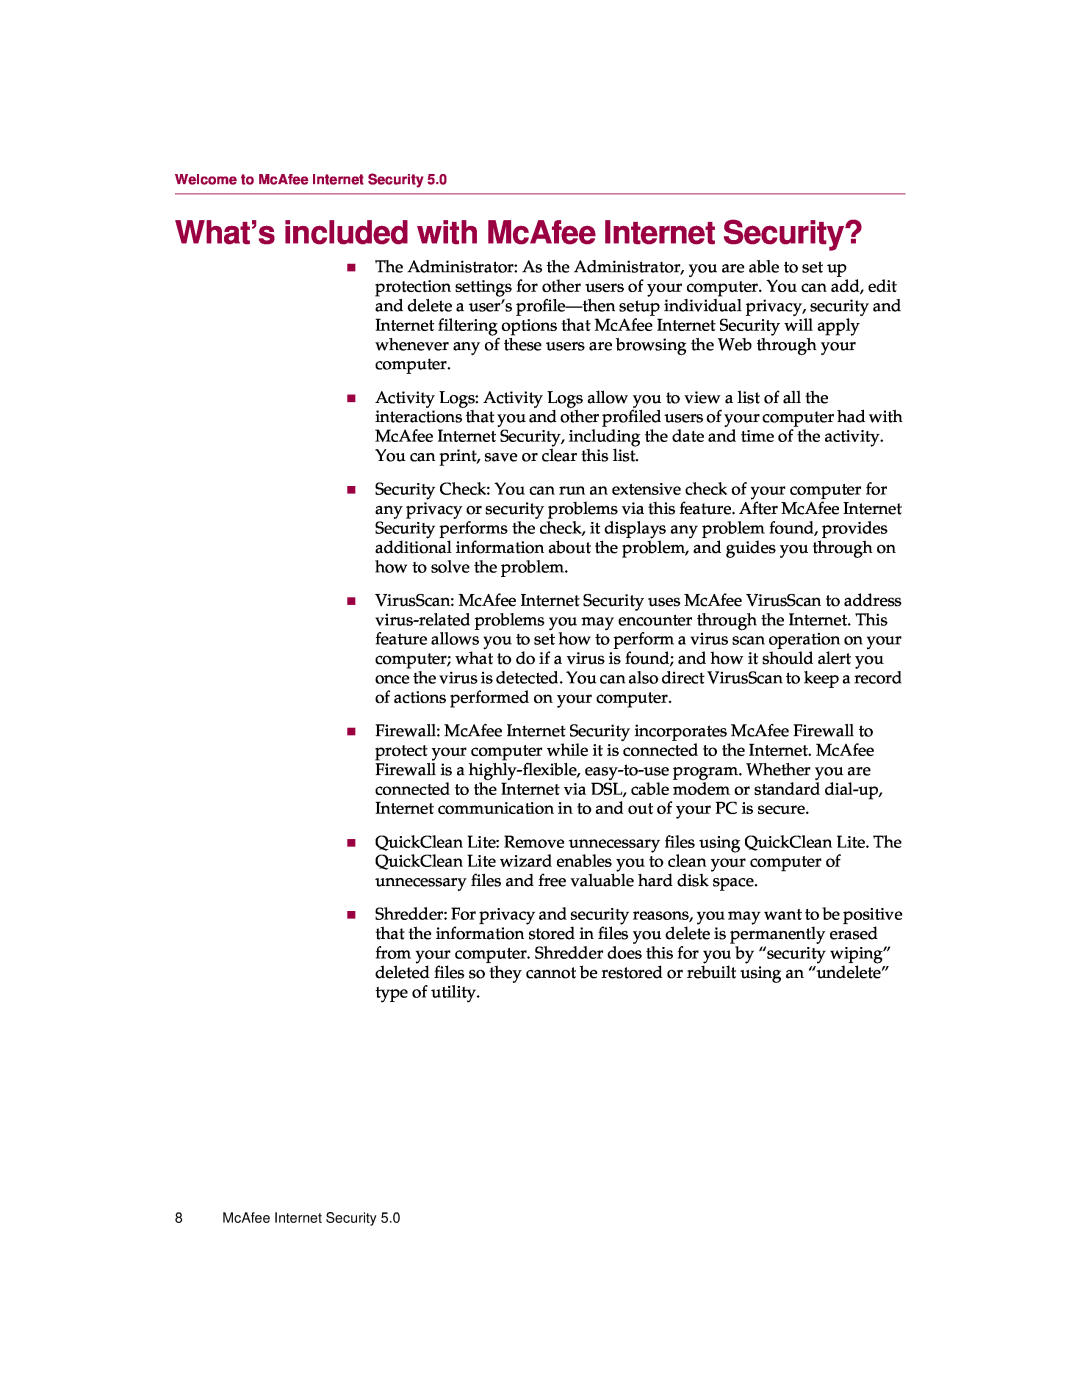 McAfee 5 manual What’s included with McAfee Internet Security?, Welcome to McAfee Internet Security 